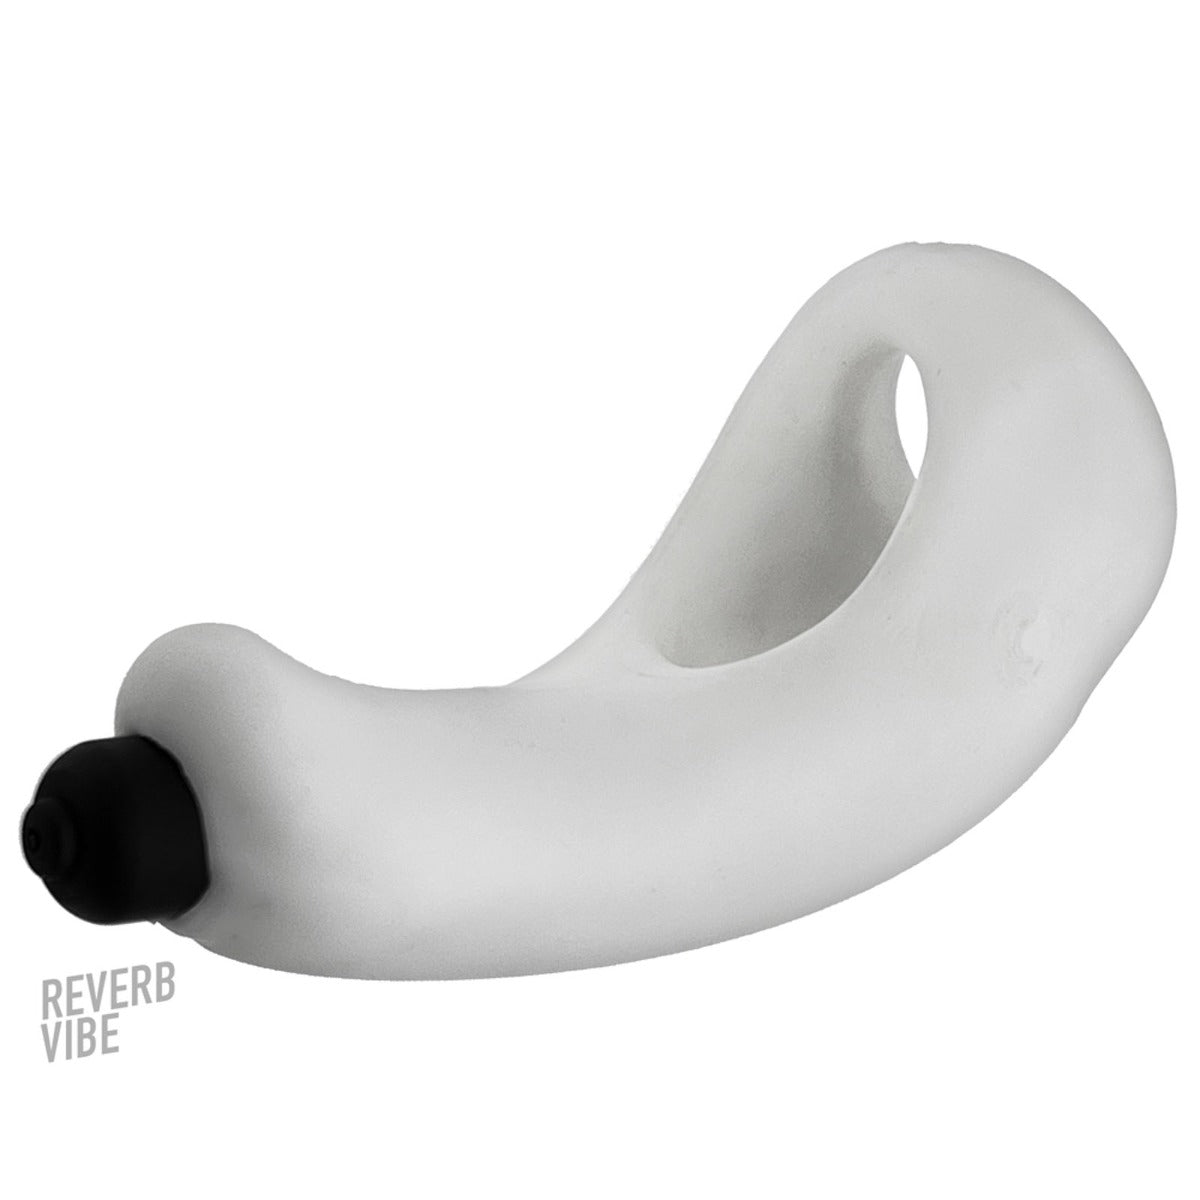 Vibrating Cock Rings Hunkyjunk Buzzfuck Sling With Taint Vibe Vibrating Cock Sling White Ice   